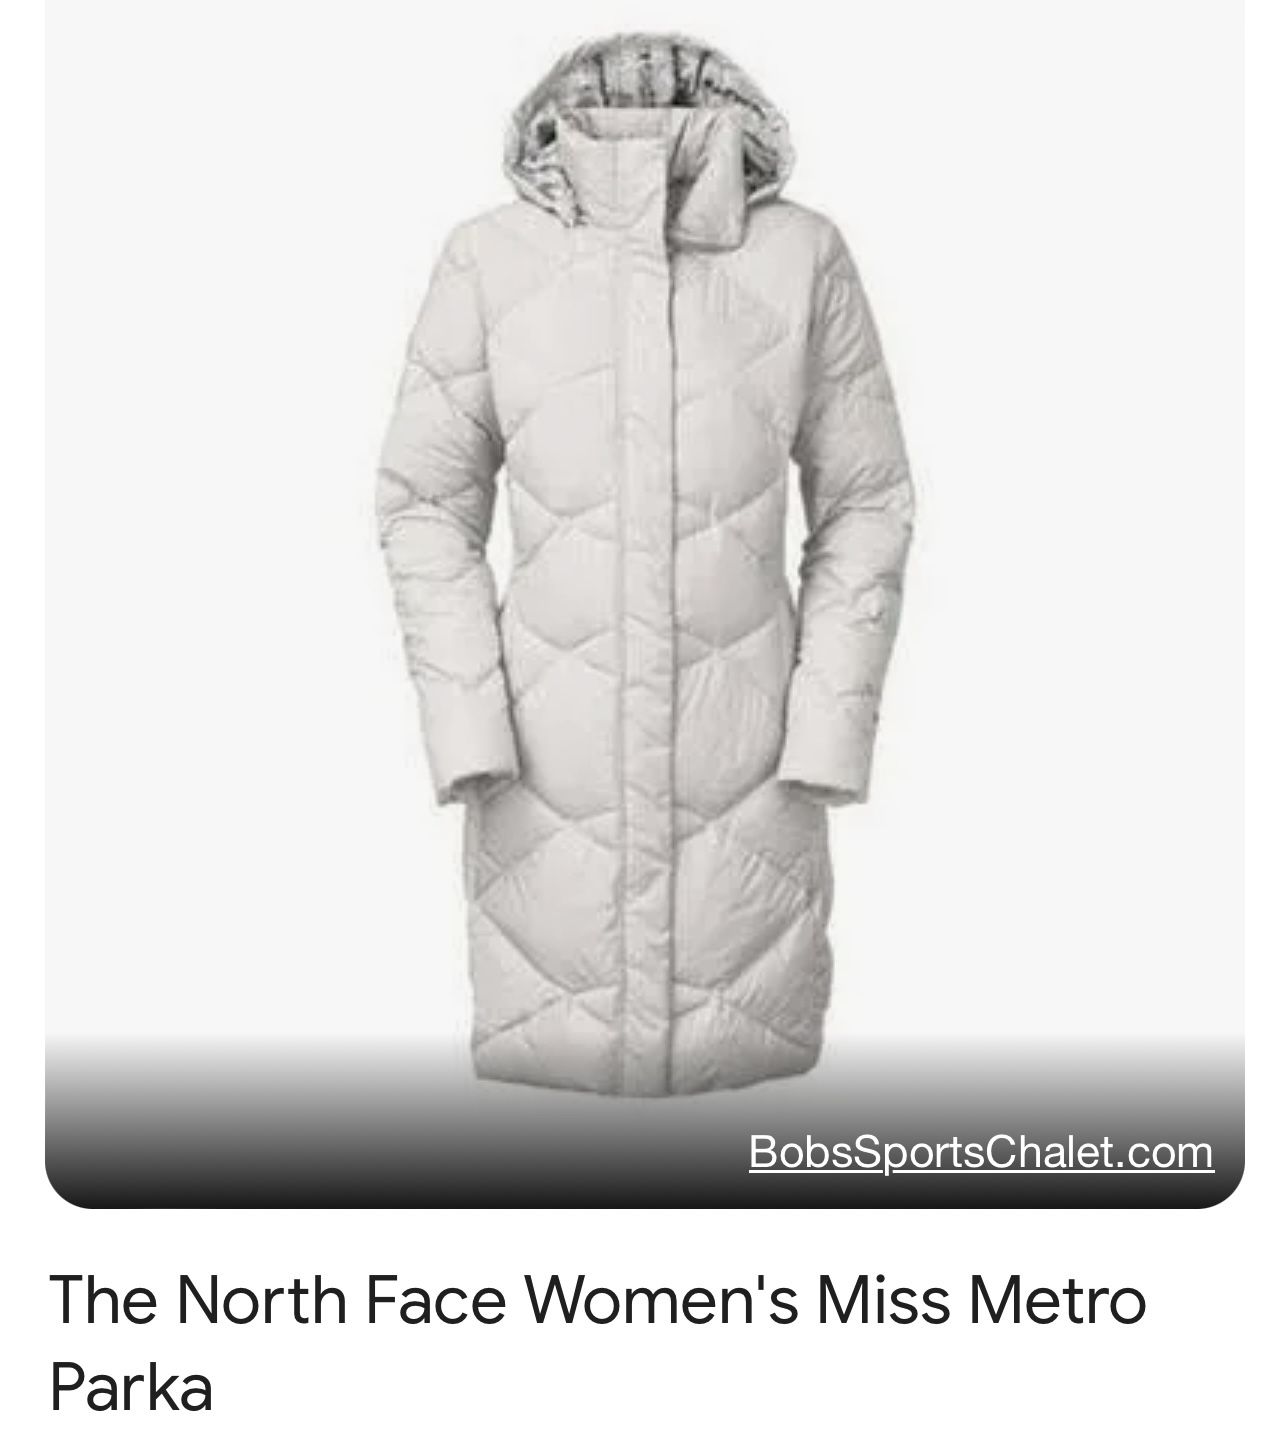 NORTH FACE Women's Insulated Parka OBO NWT $75